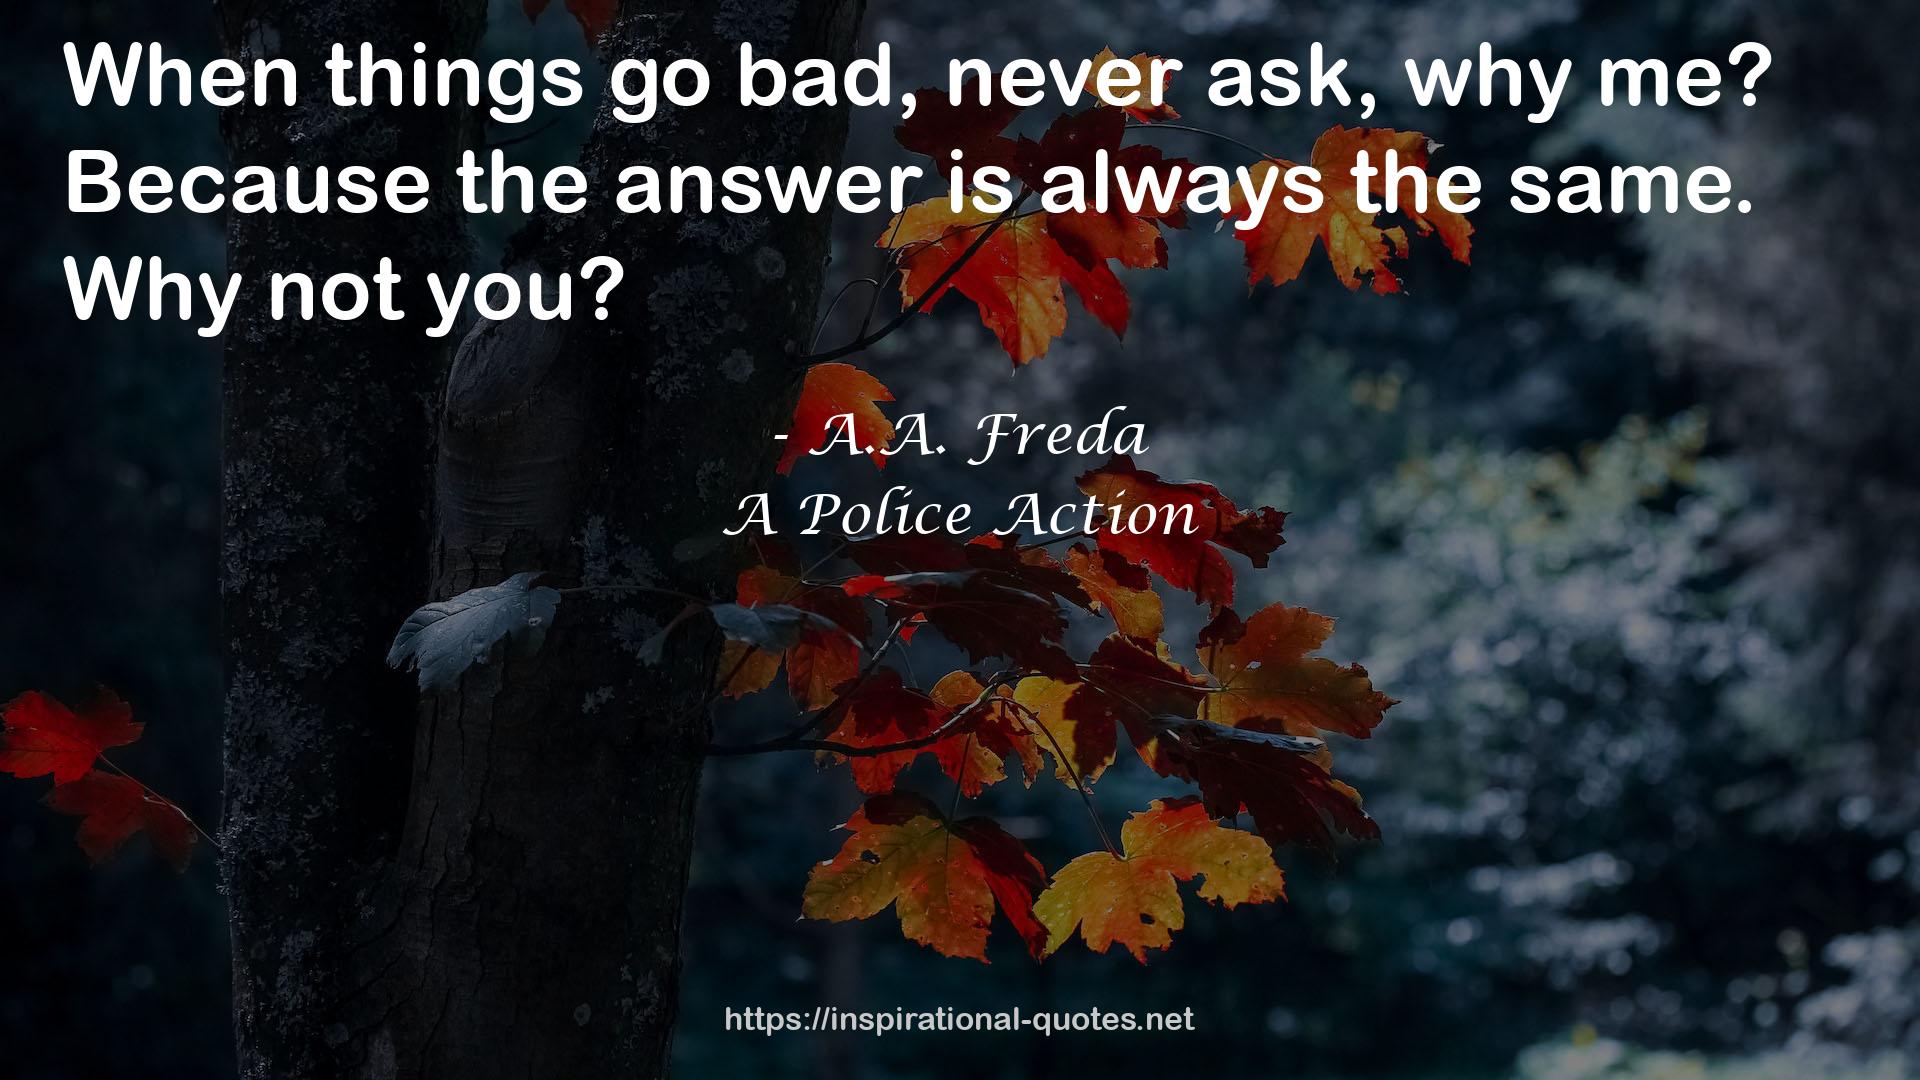 A Police Action QUOTES